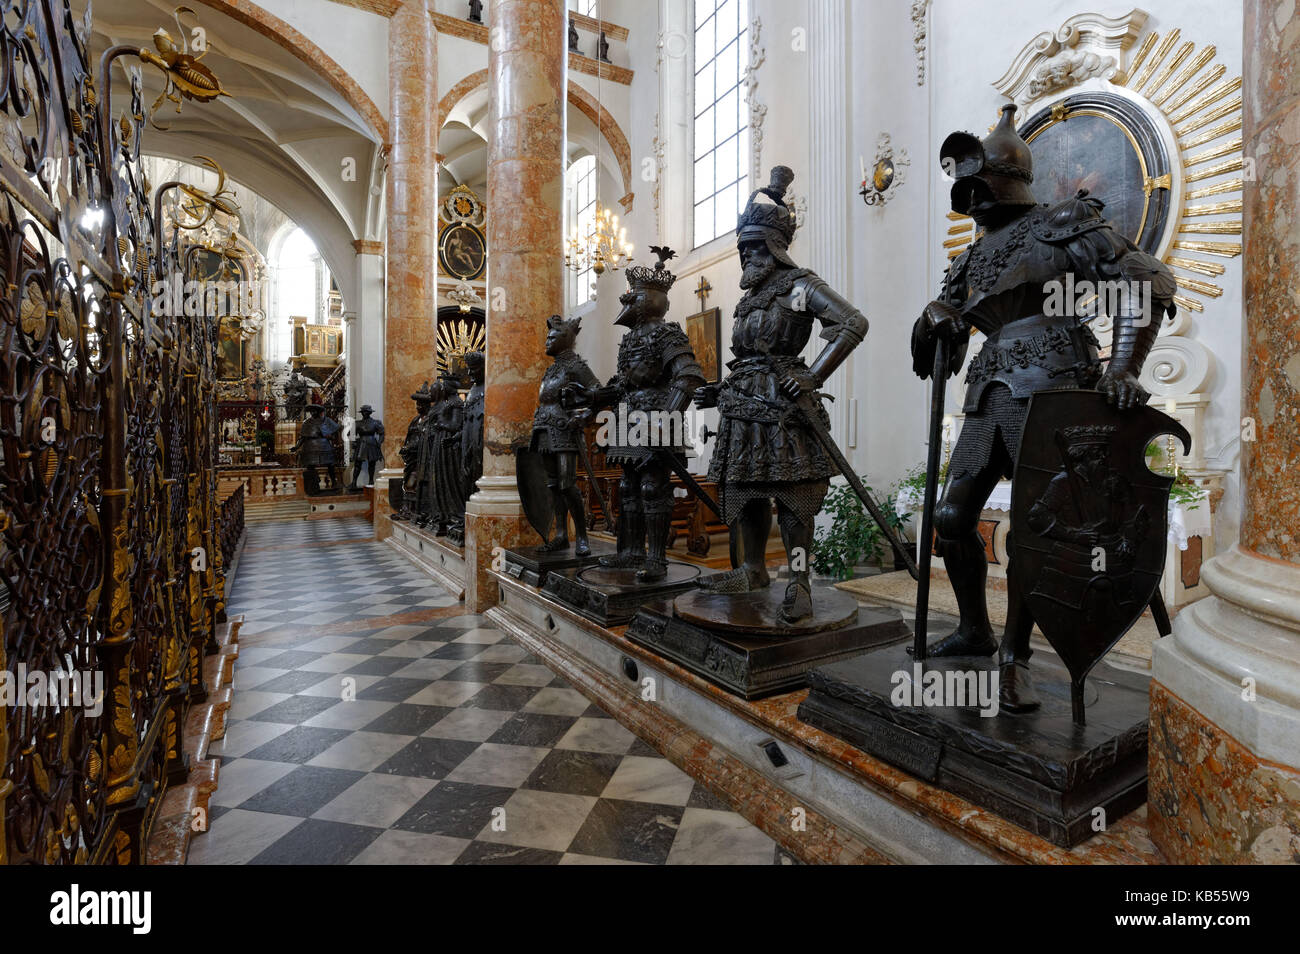 Austria, Tyrol, Innsbruck, Hofkirche, 28 monumental bronze statues surround the tomb of the emperor Maximilian the 1st, the most important imperial monument in Europe Stock Photo